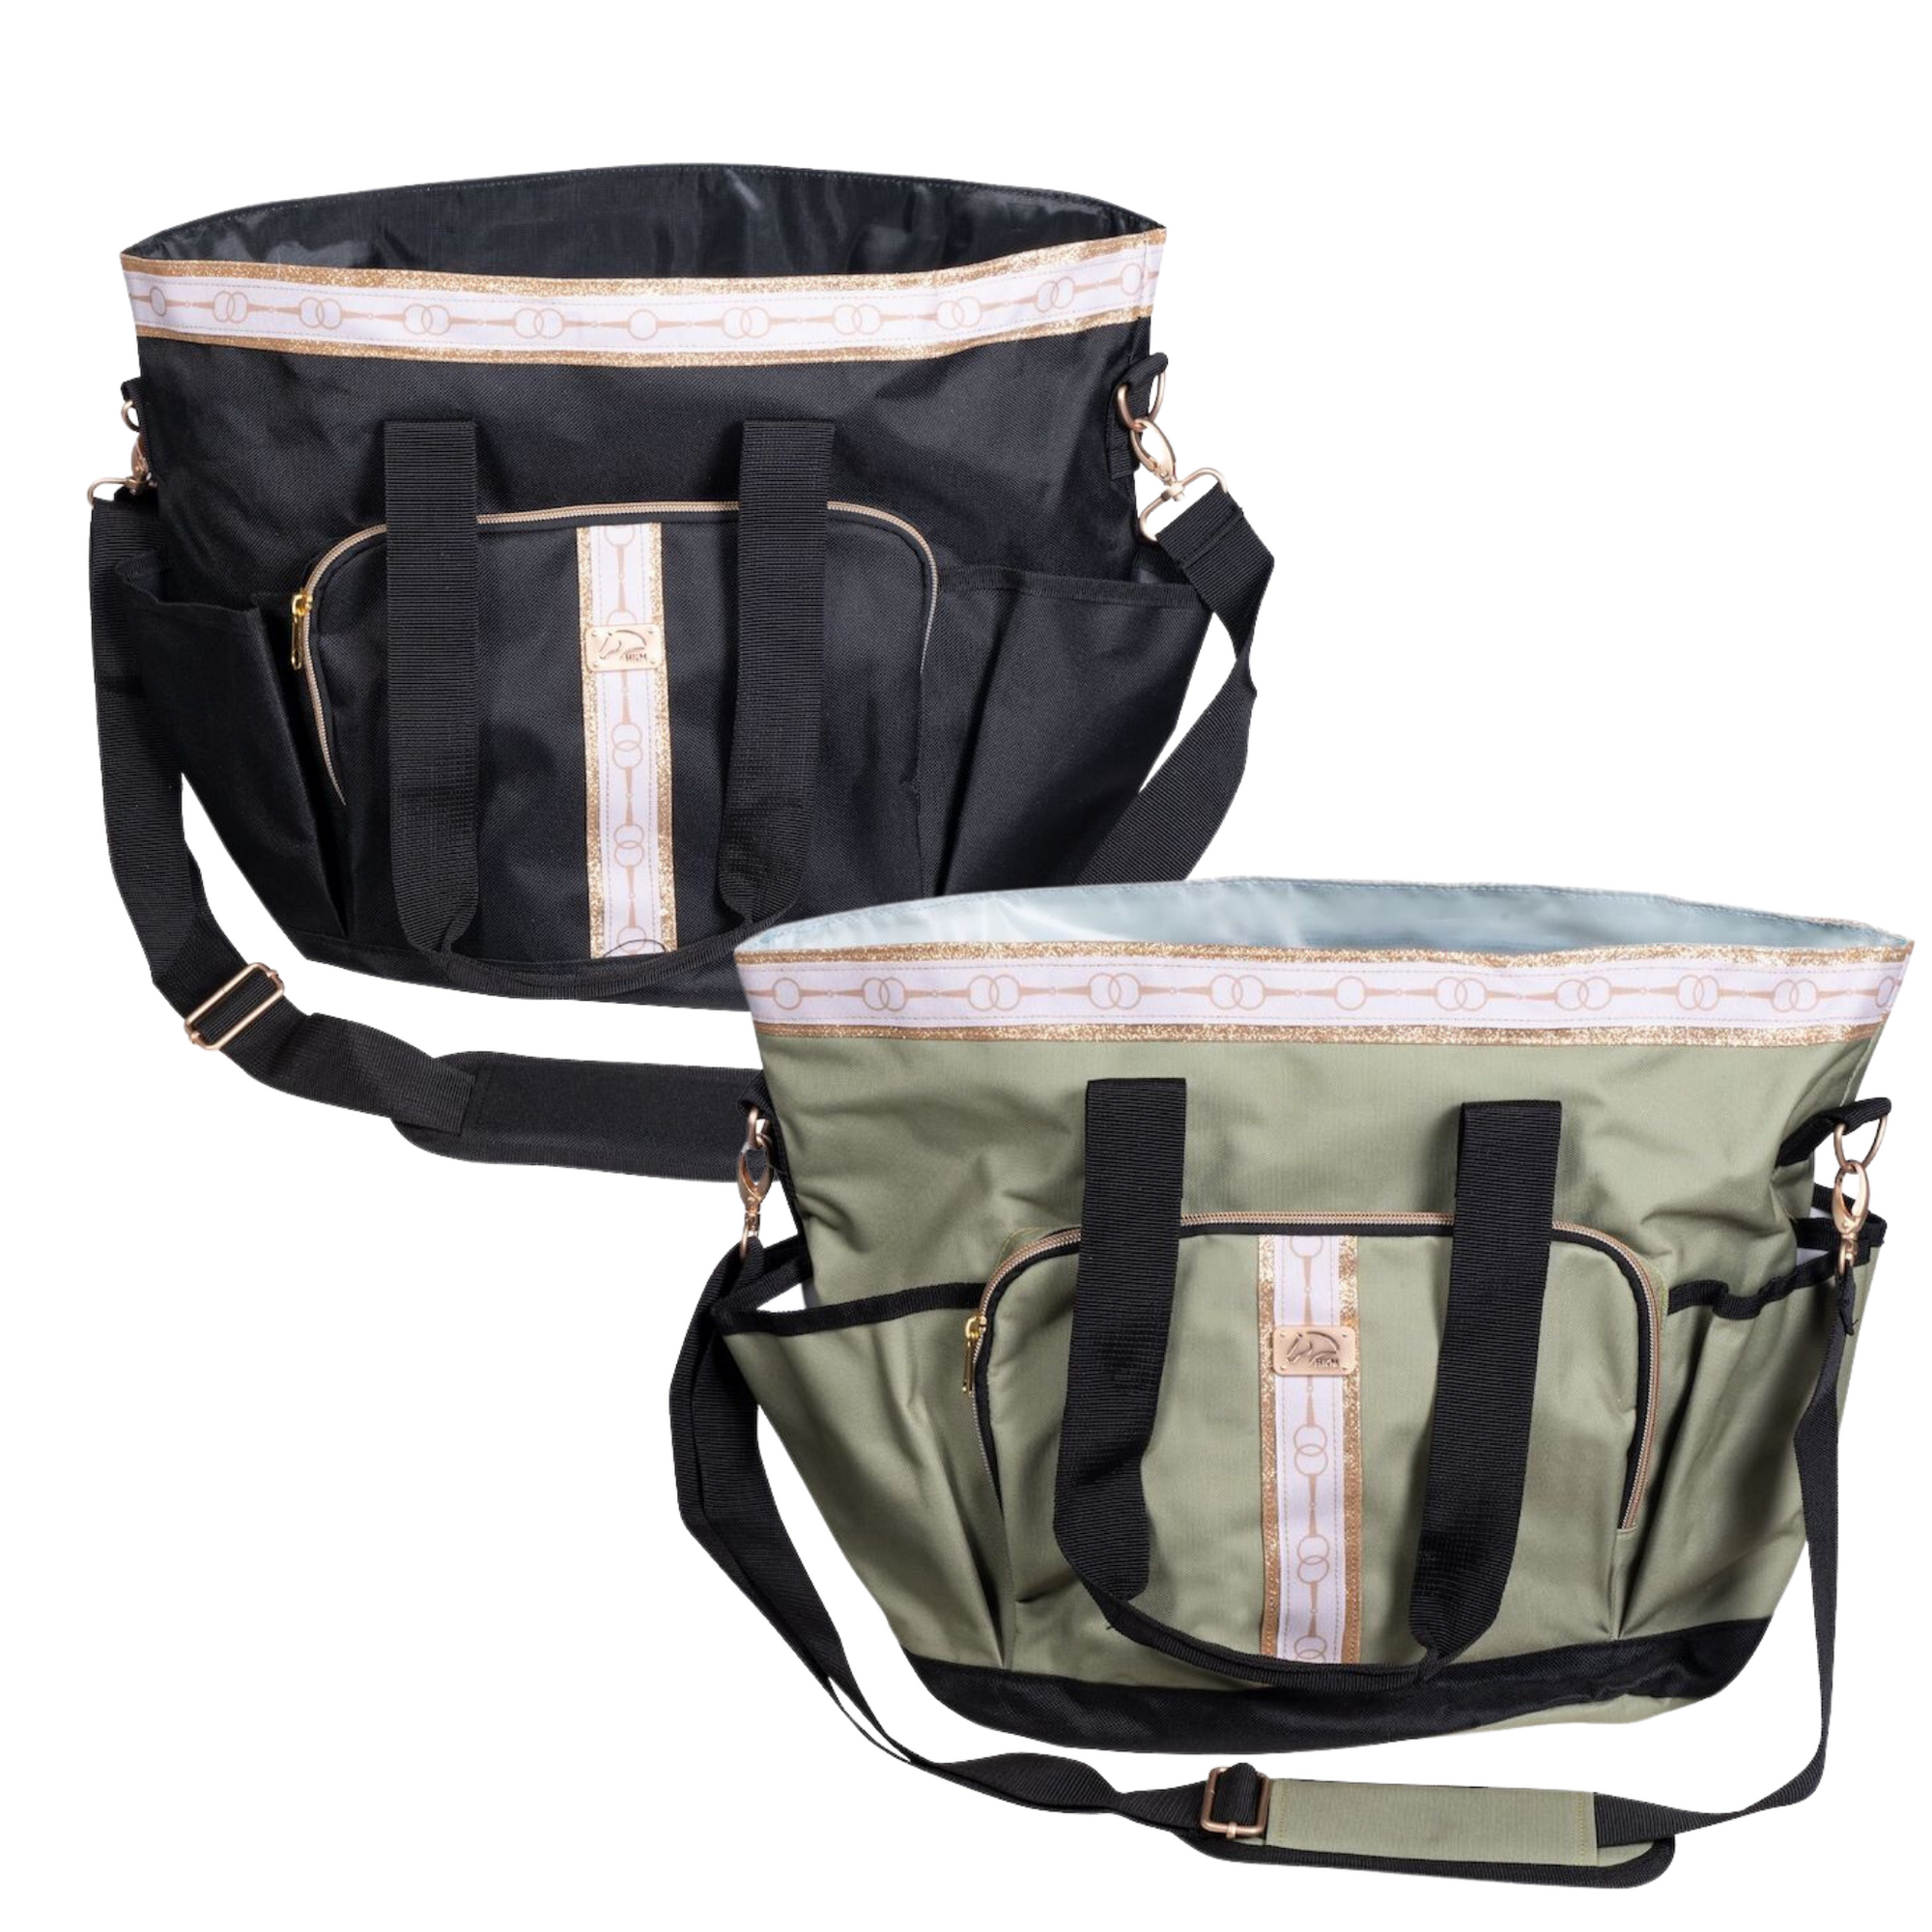 black and green Grooming bags with gold and white trim